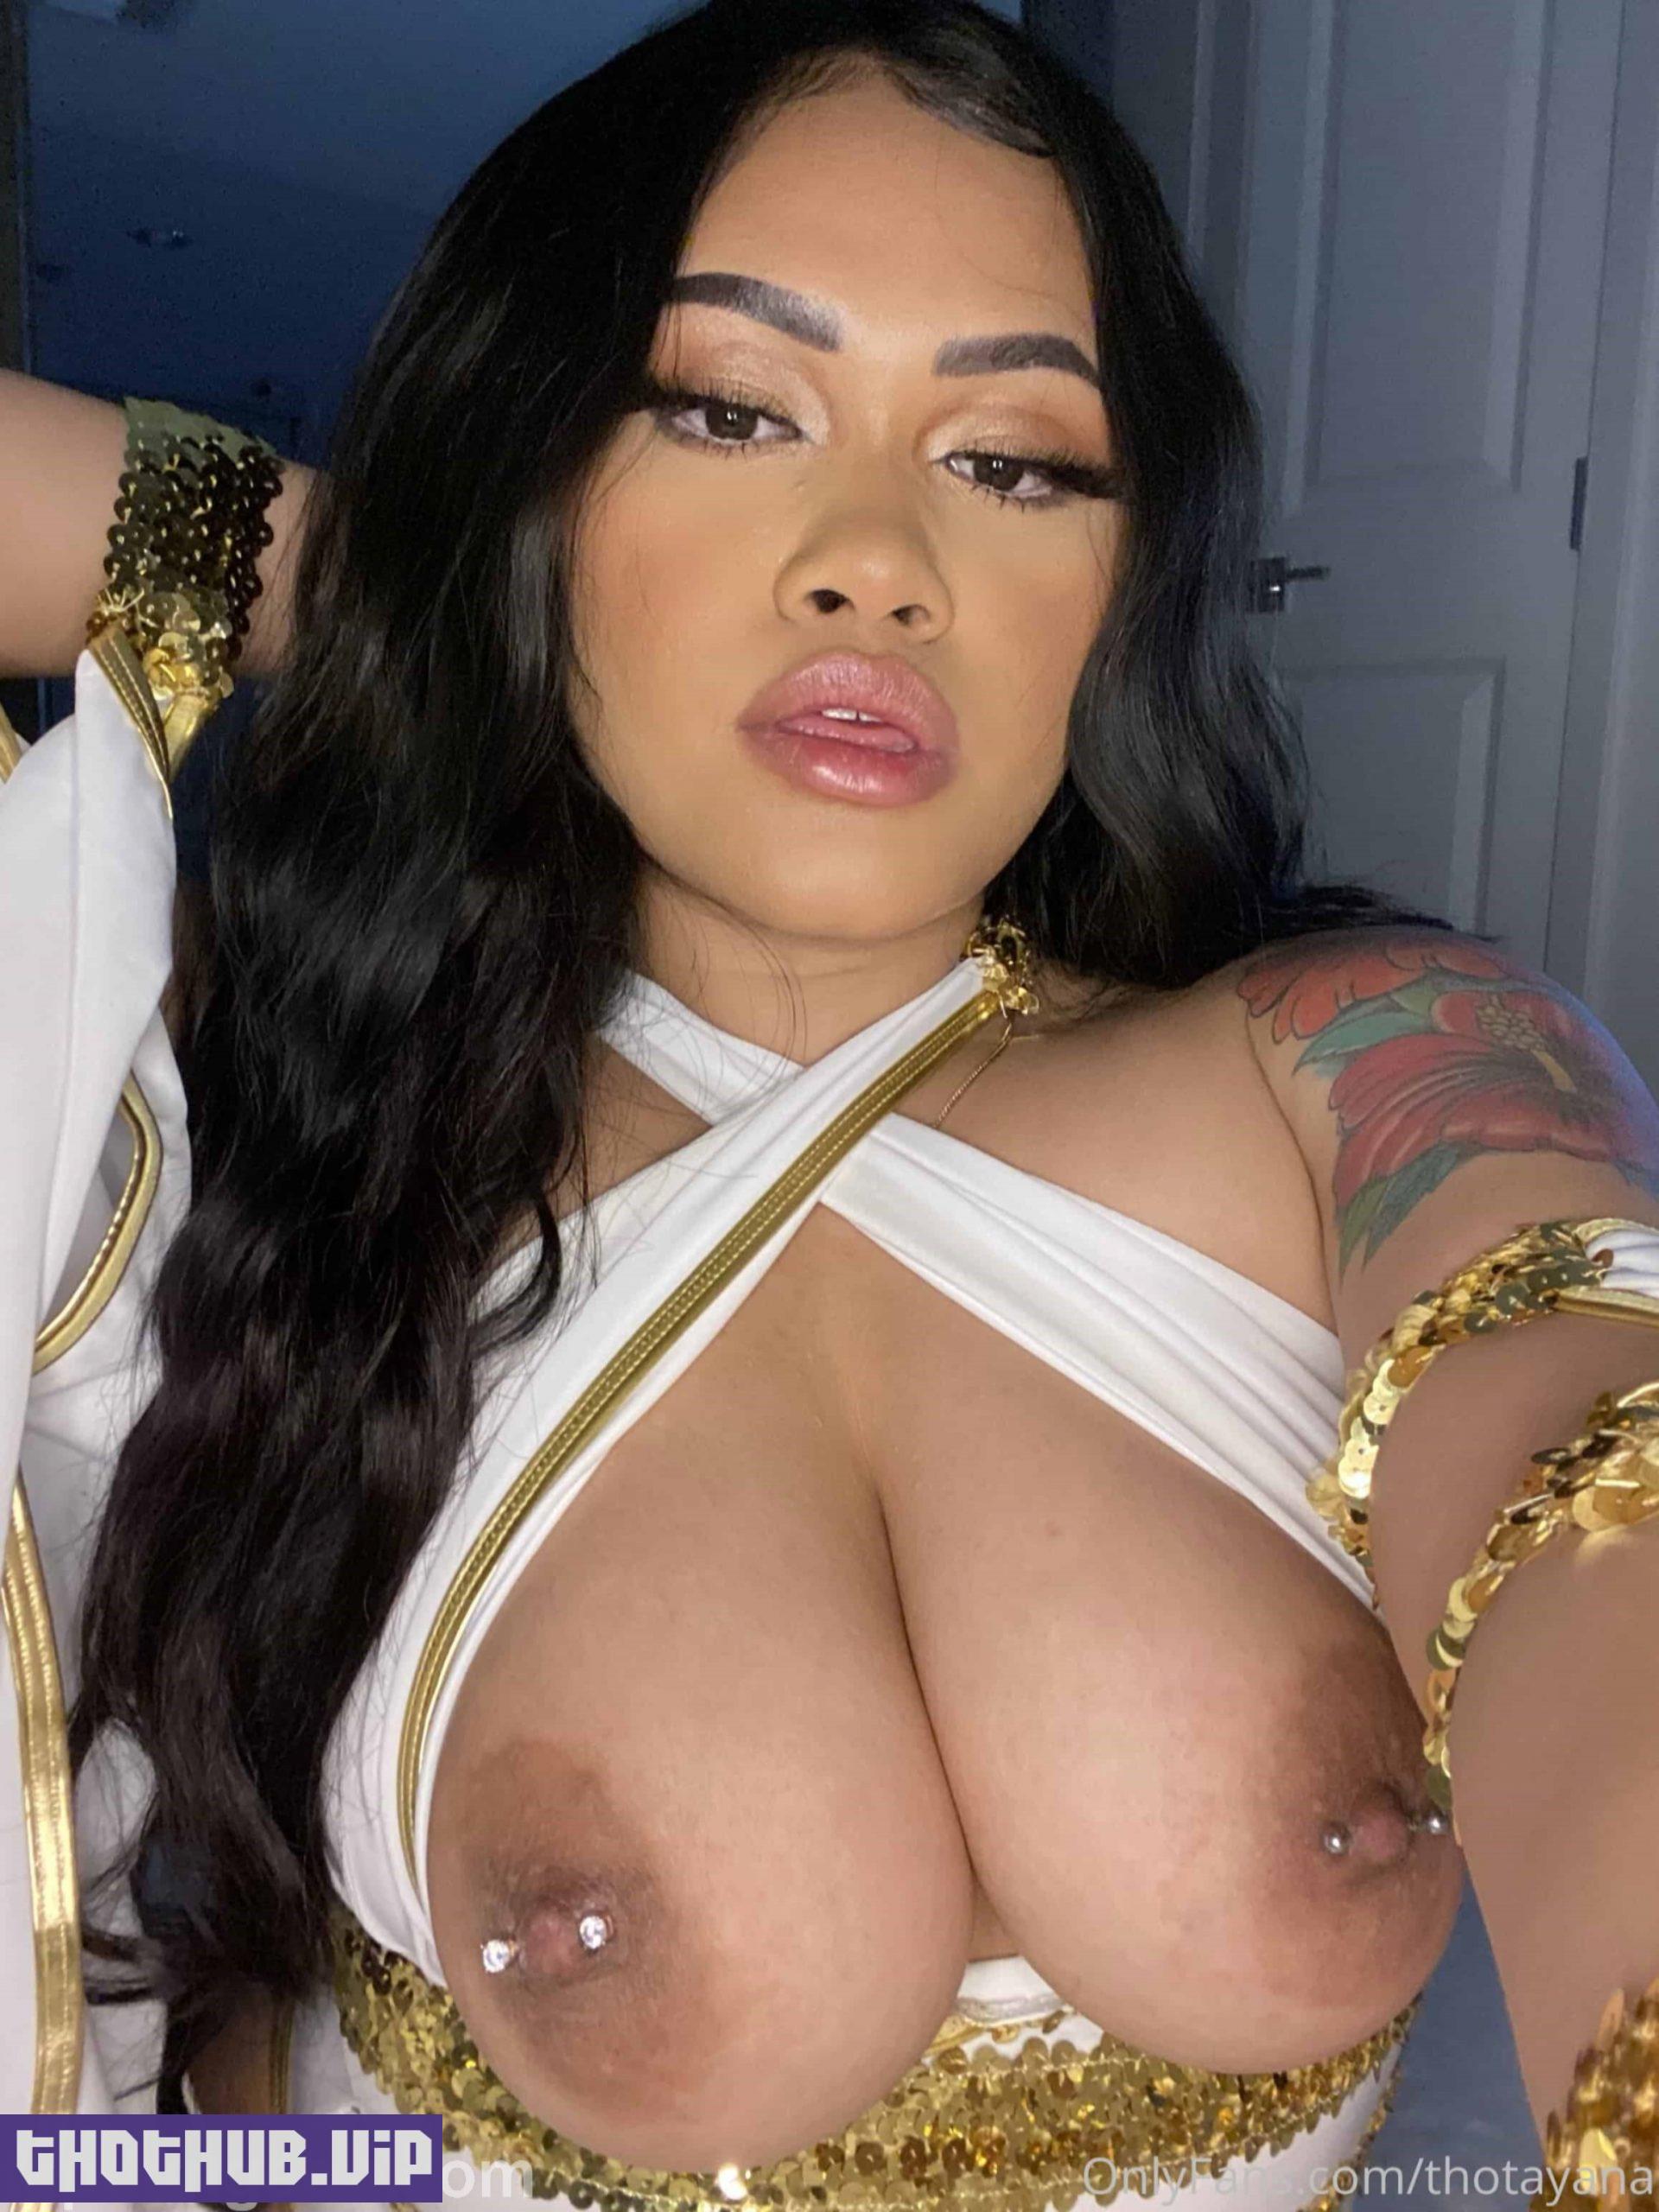 1660939628 827 Thotayana %E2%80%93 Busty Asian Thot Onlyfans Nudes